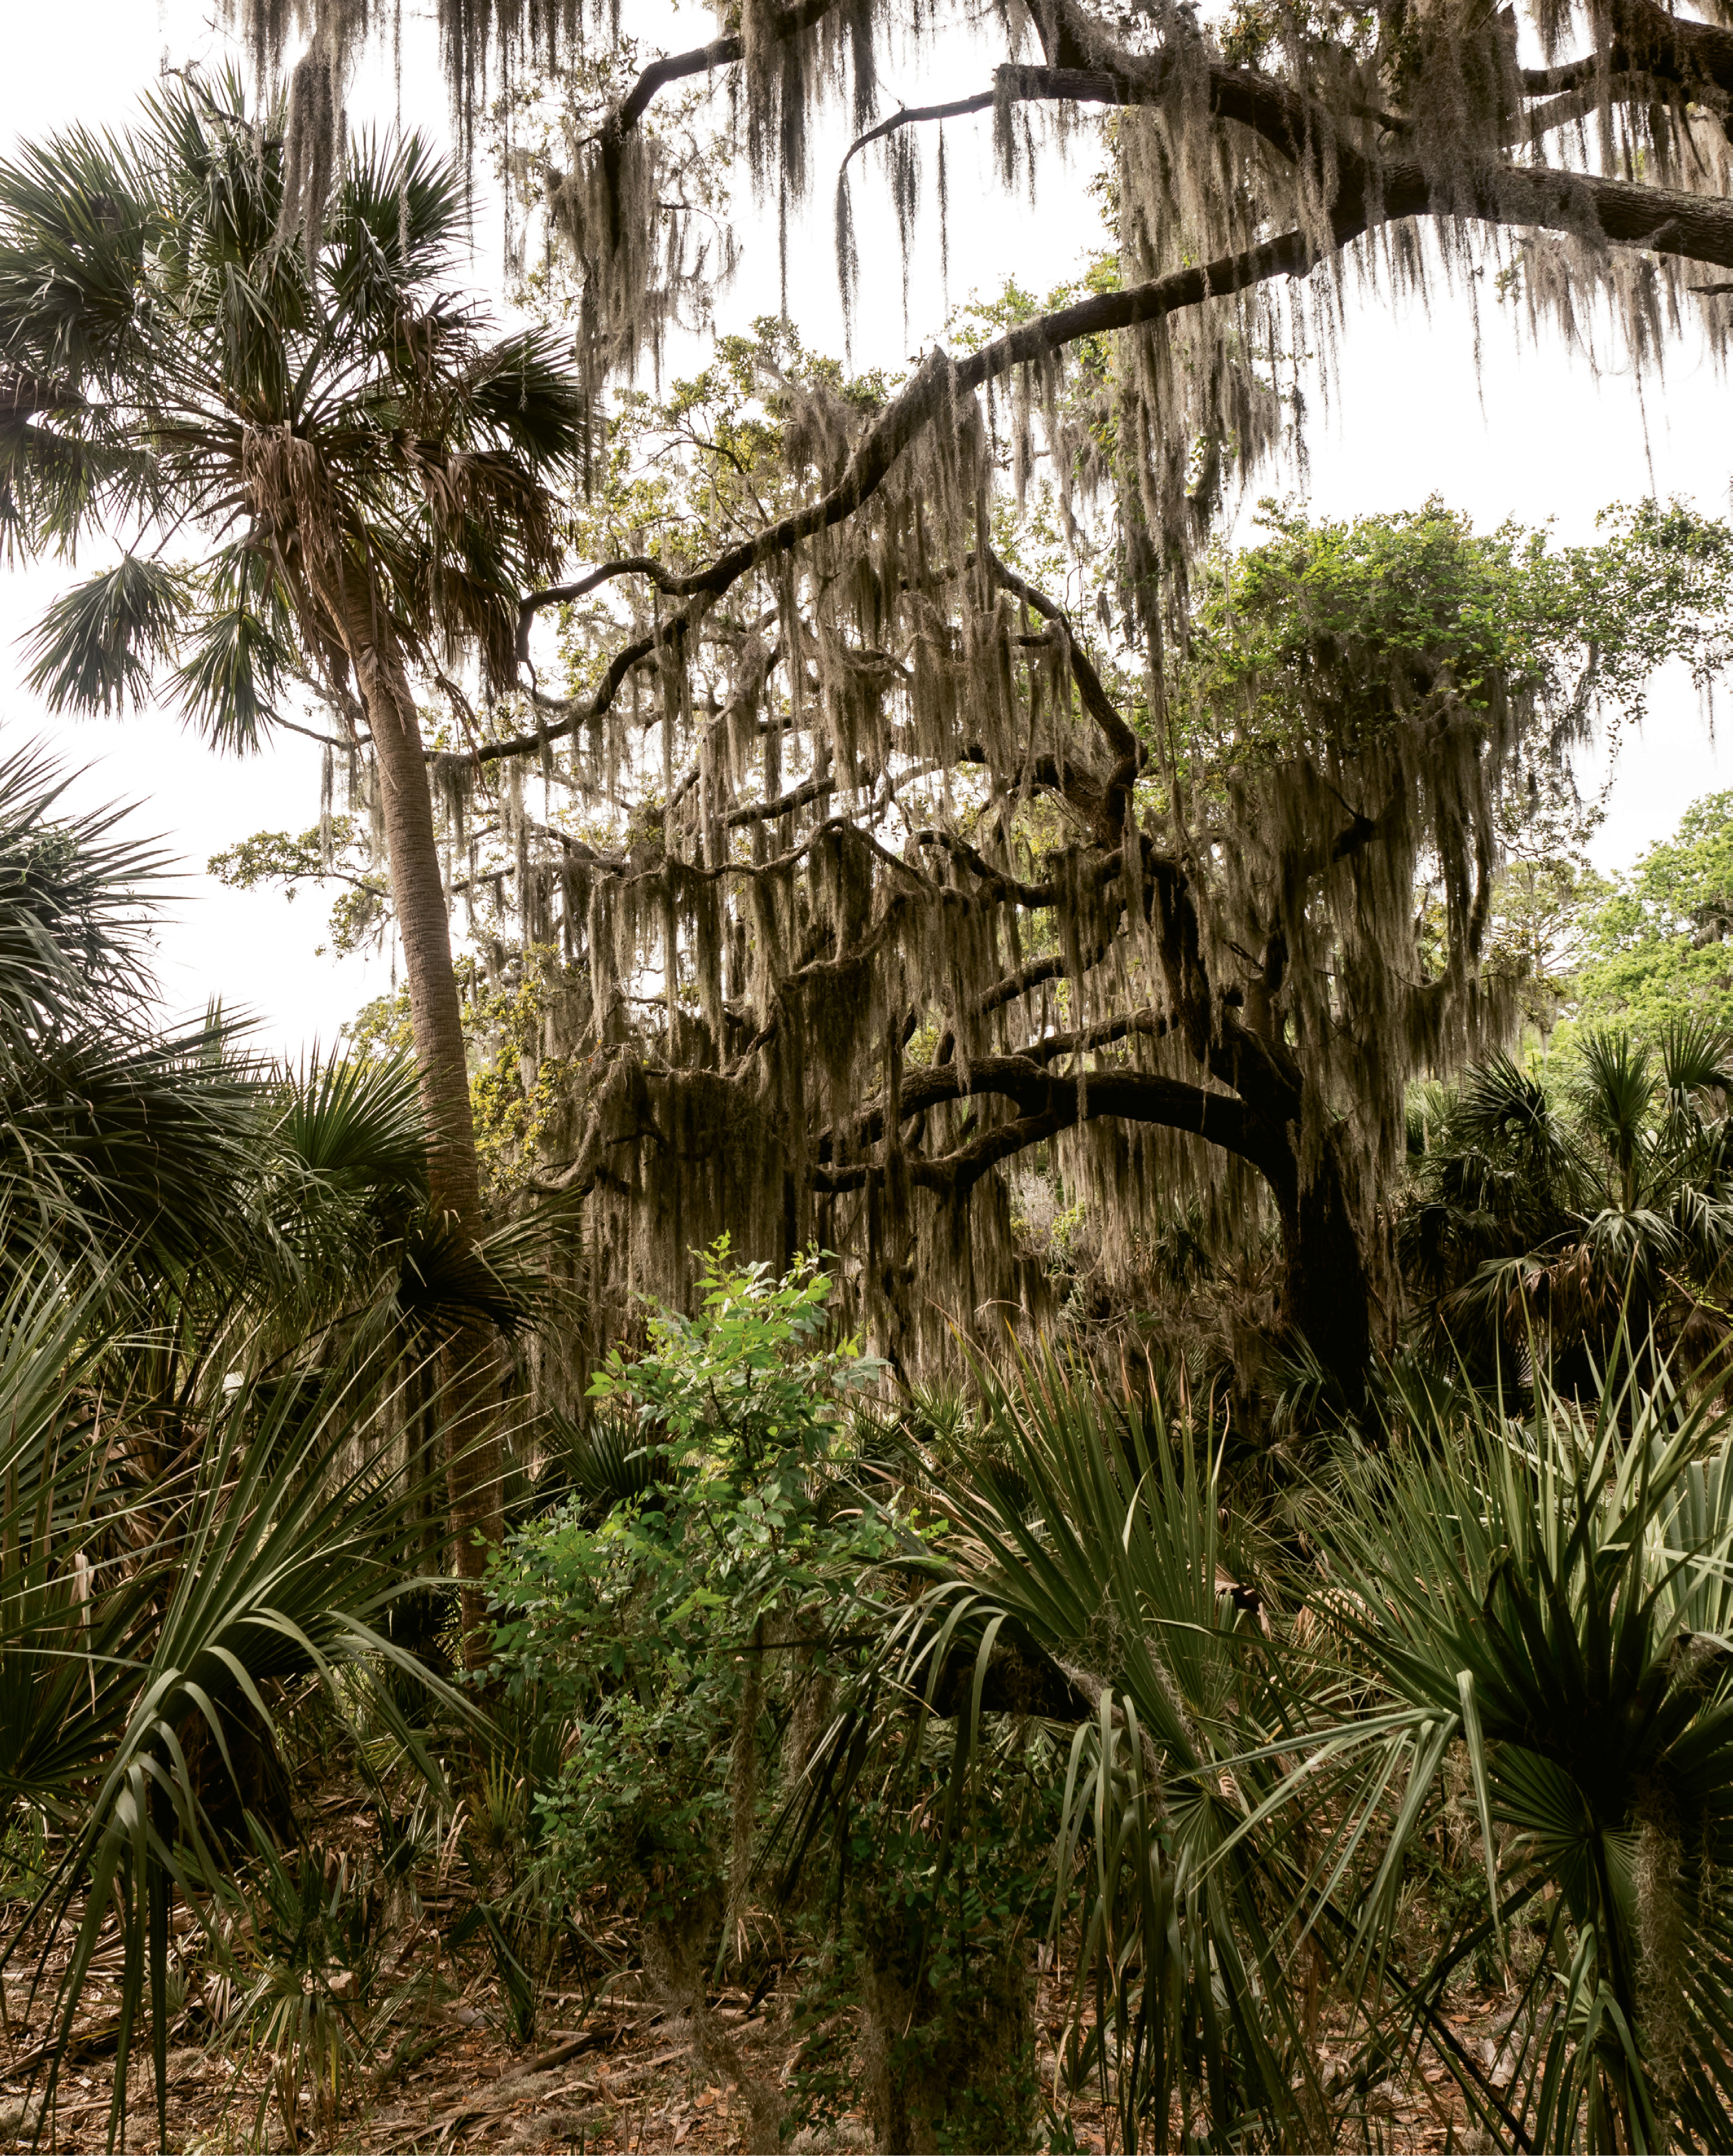 Spanish moss is thick in the maritime forest.